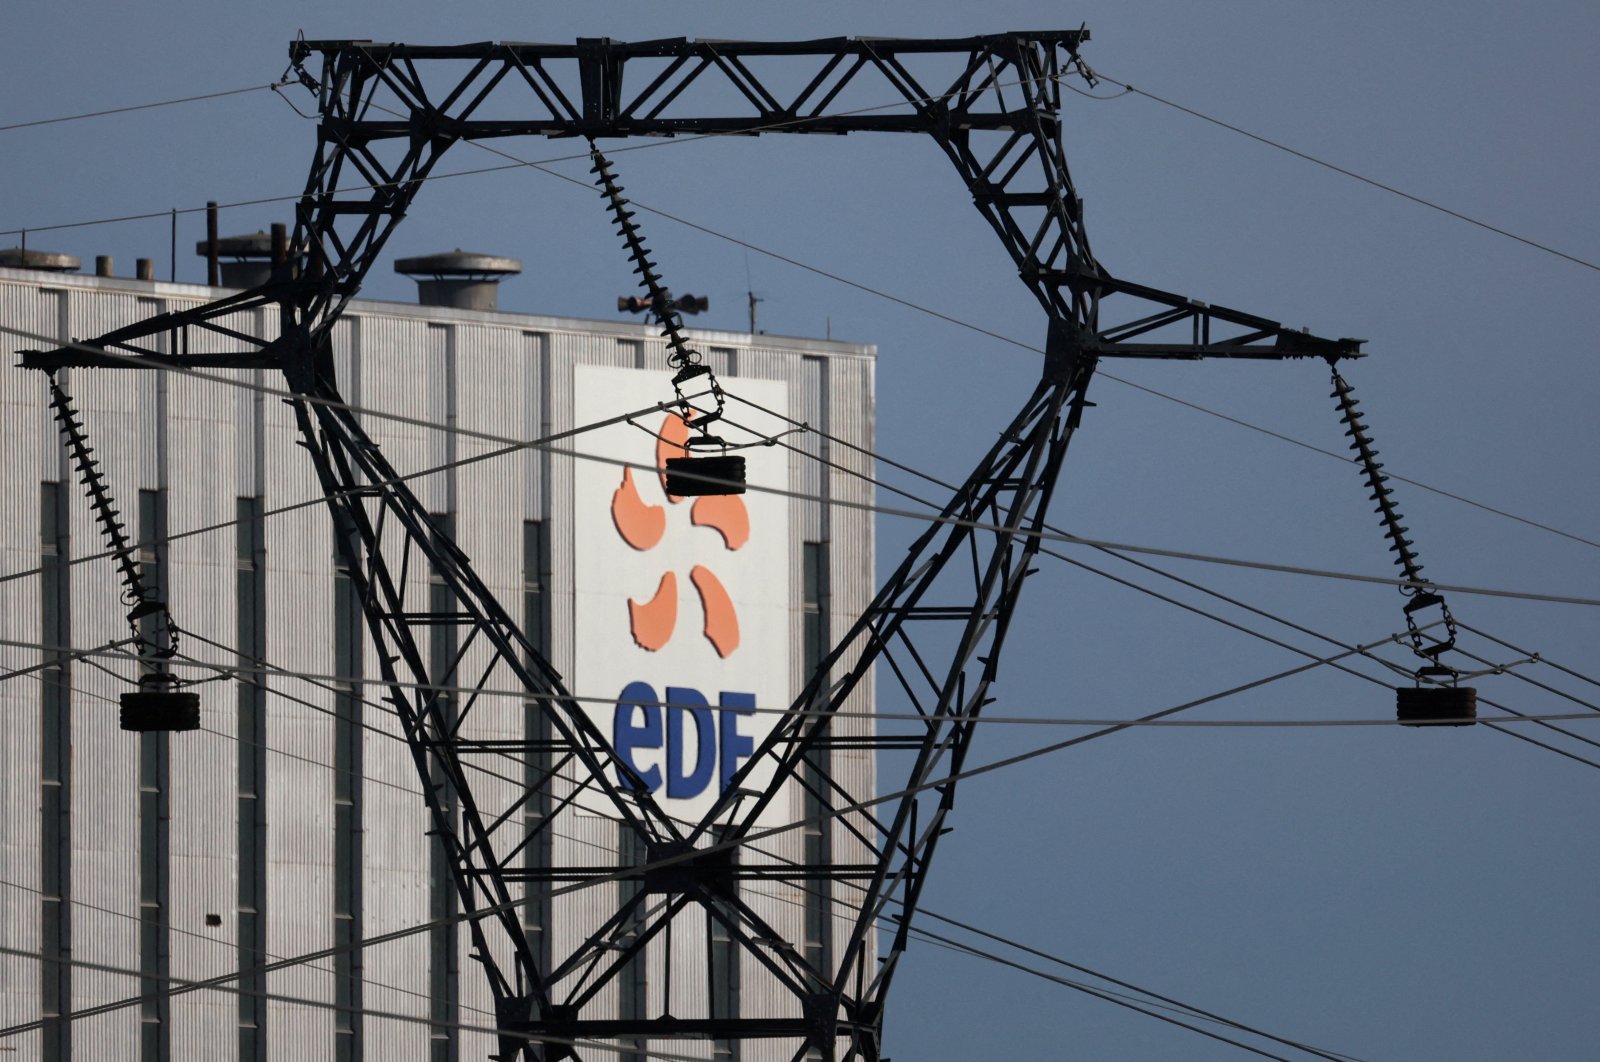 Electrical power pylons of high-tension electricity power lines are seen next to the EDF power plant in Bouchain, near Valenciennes, France, Feb.15, 2022. (Reuters Photo)